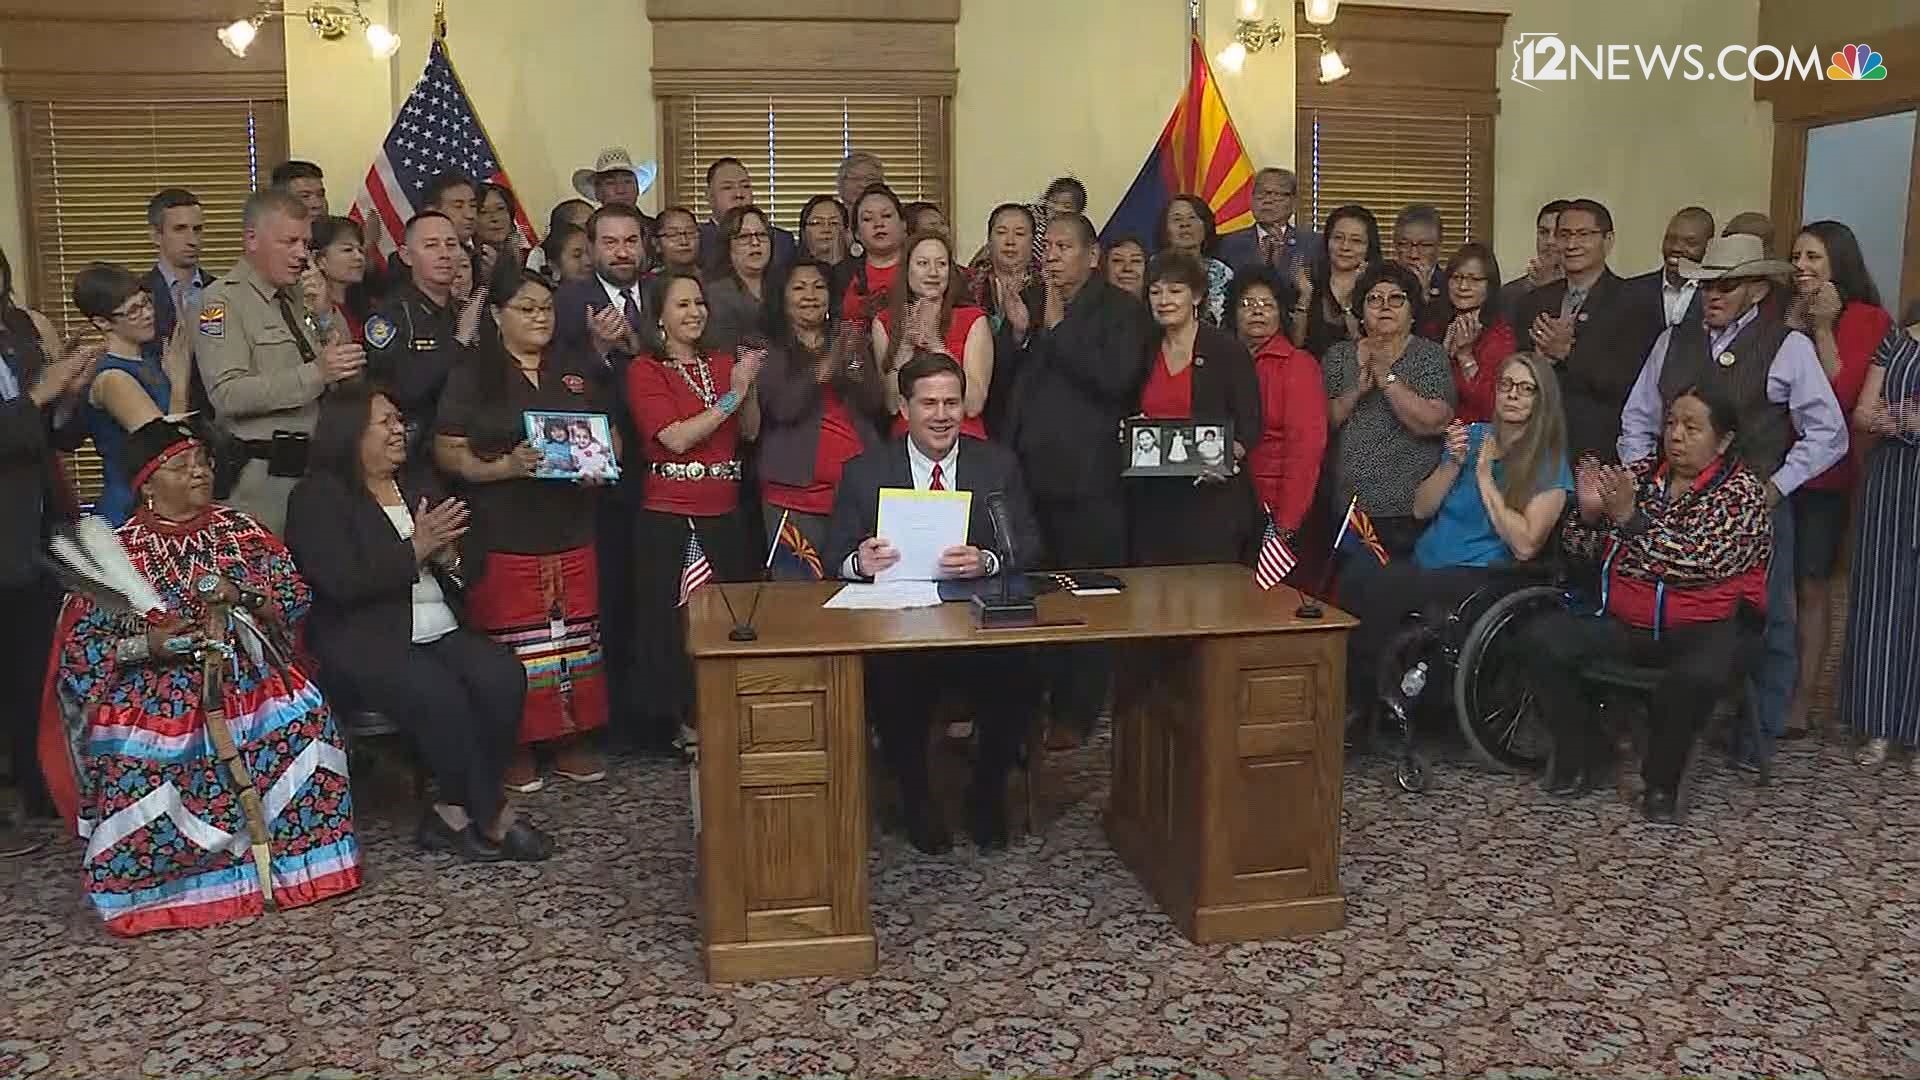 Arizona's Governor Doug Ducey signed a bill Tuesday that will take action for missing and murdered Indigenous women and girls in the state. The bill establishes a 21 member study committee. The governor said the goal of the bill is to, "determine how Arizona can reduce and end violence against Indigenous women and girls." The bill passed unanimously in the Arizona legislature.